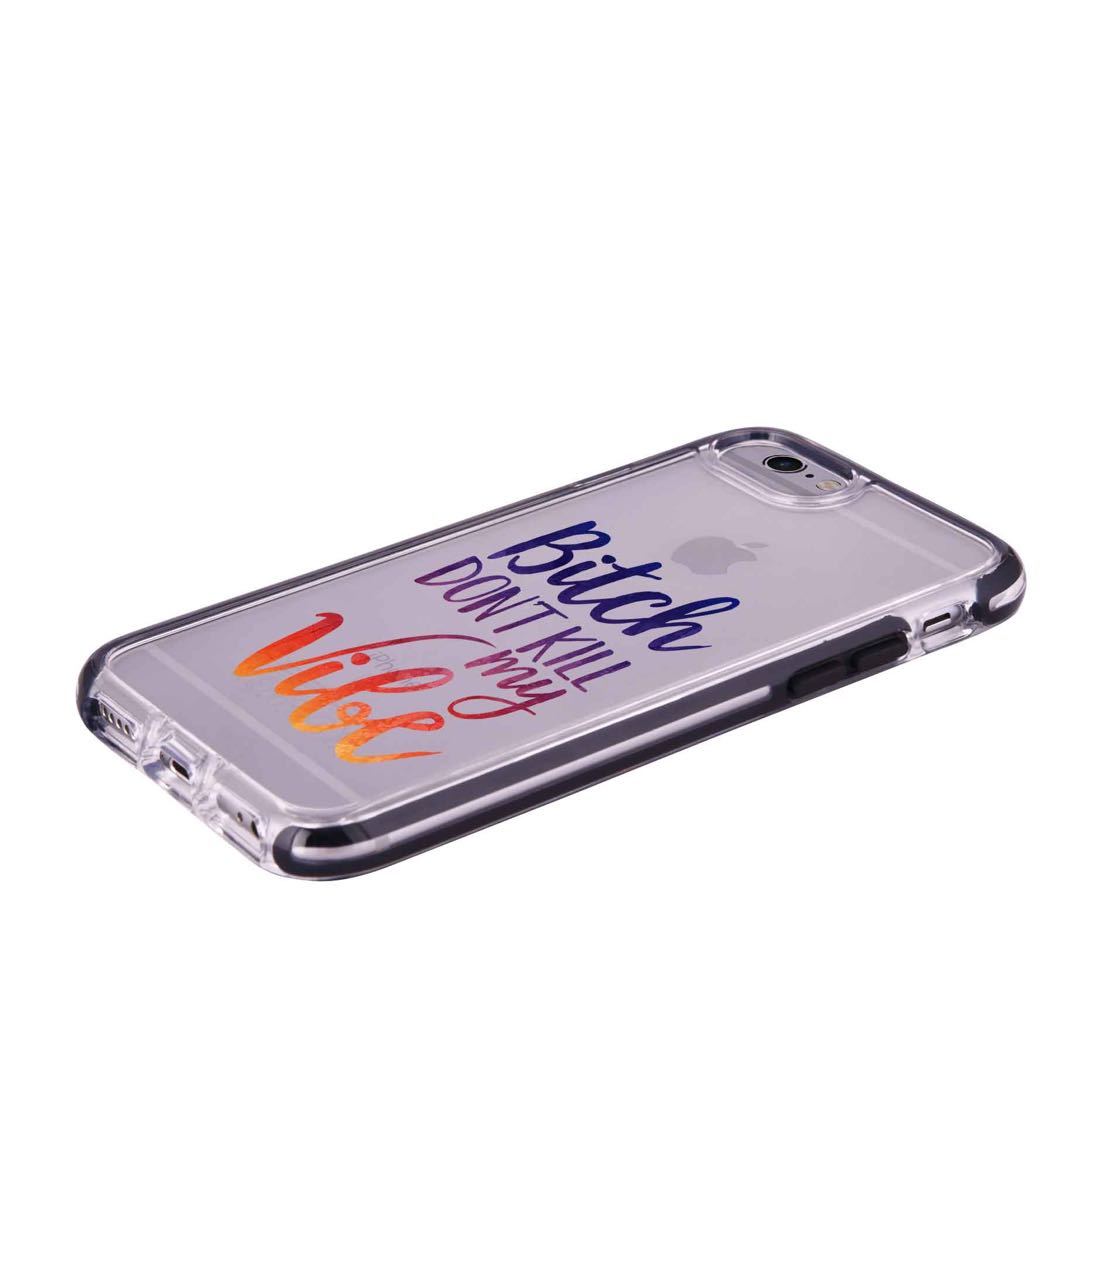 Dont kill my Vibe - Extreme Phone Case for iPhone 6 Plus